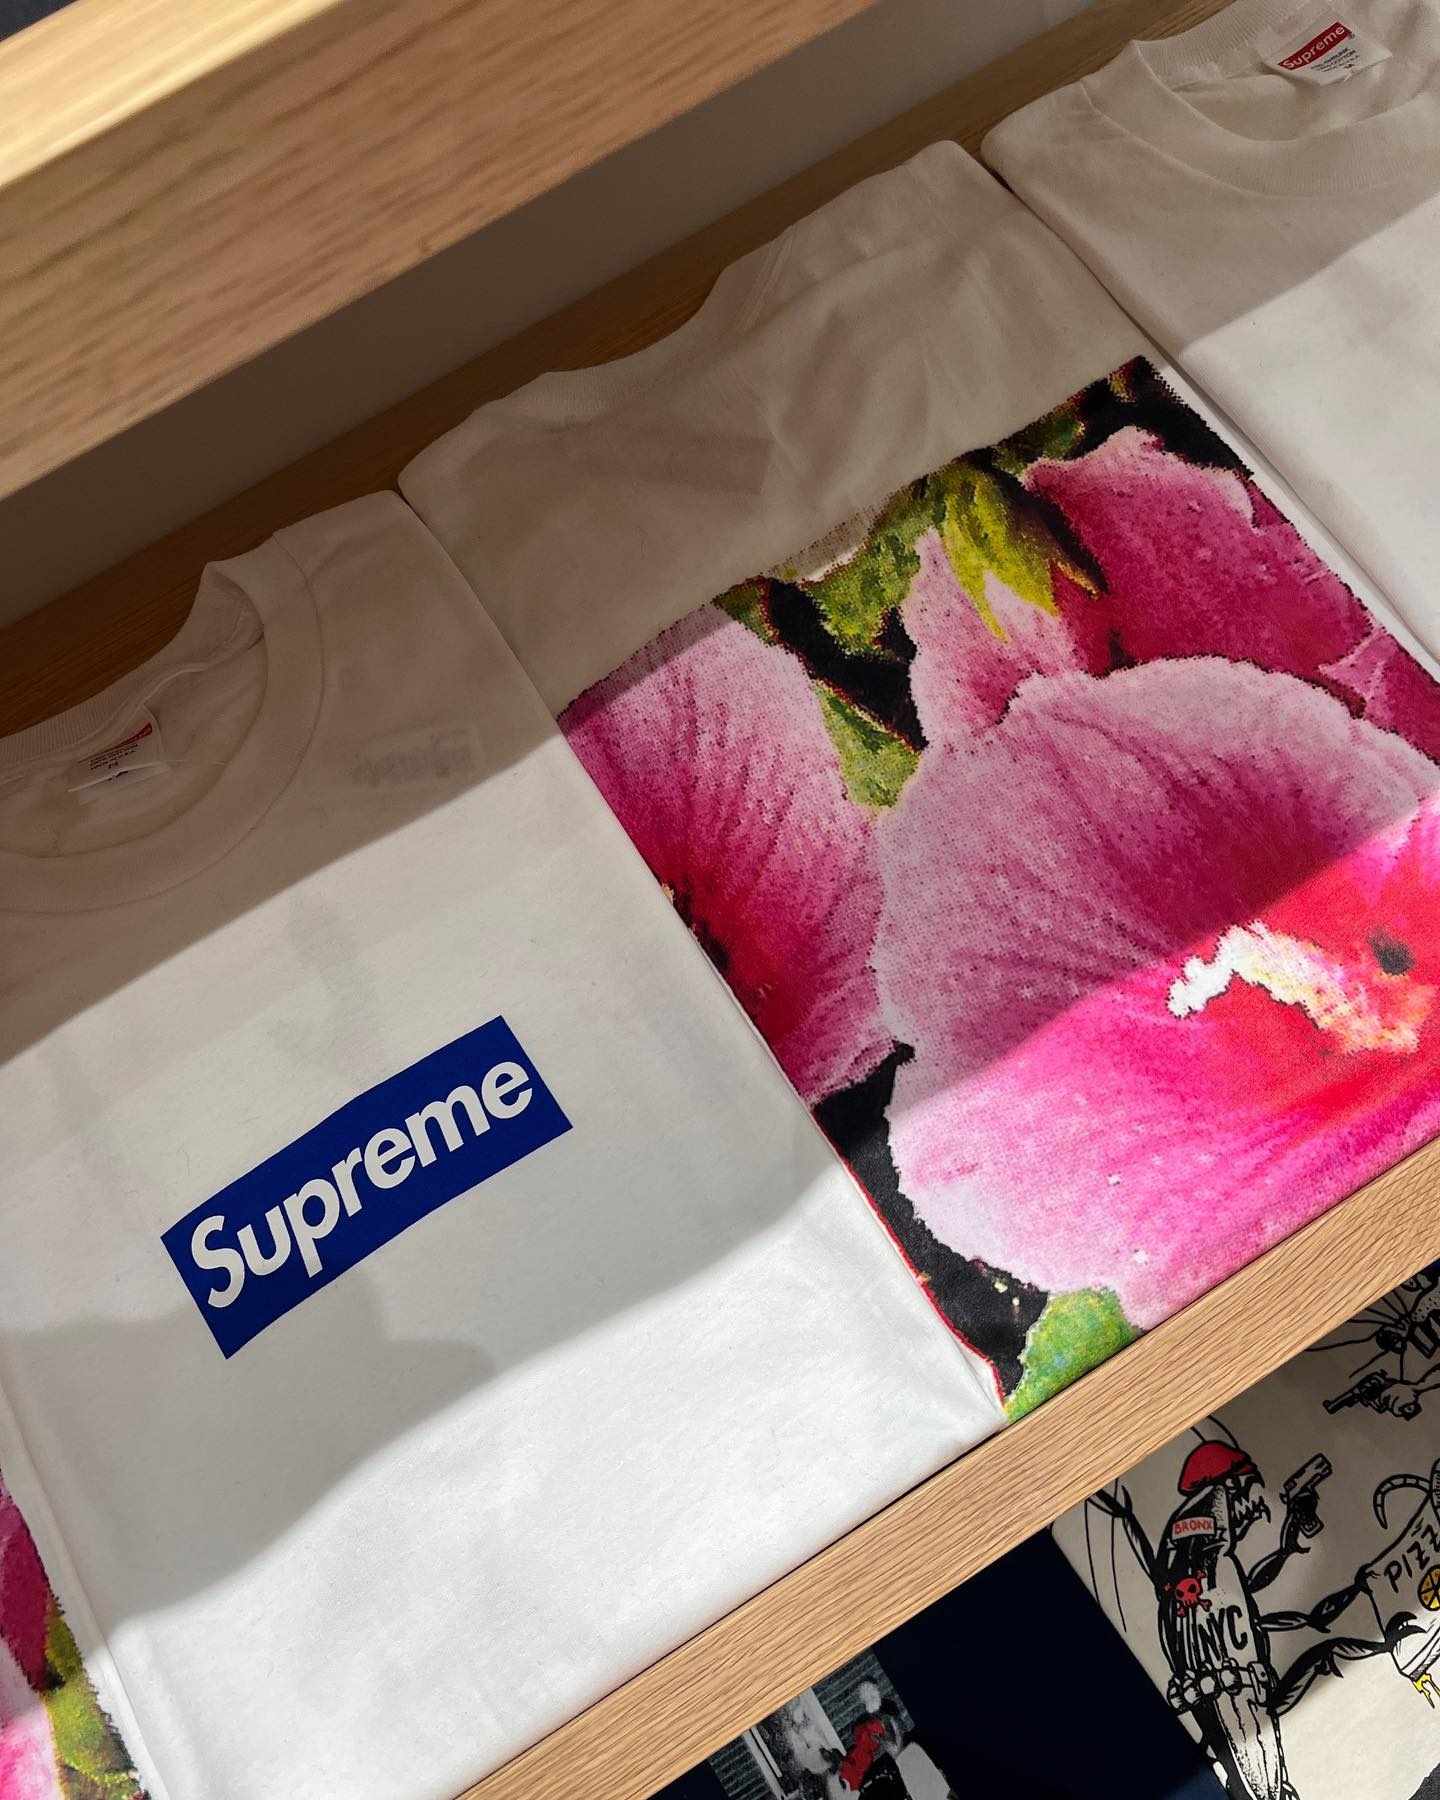 Supreme Seoul Inside Look and Opening Box Logo T-Shirt/Hoodie